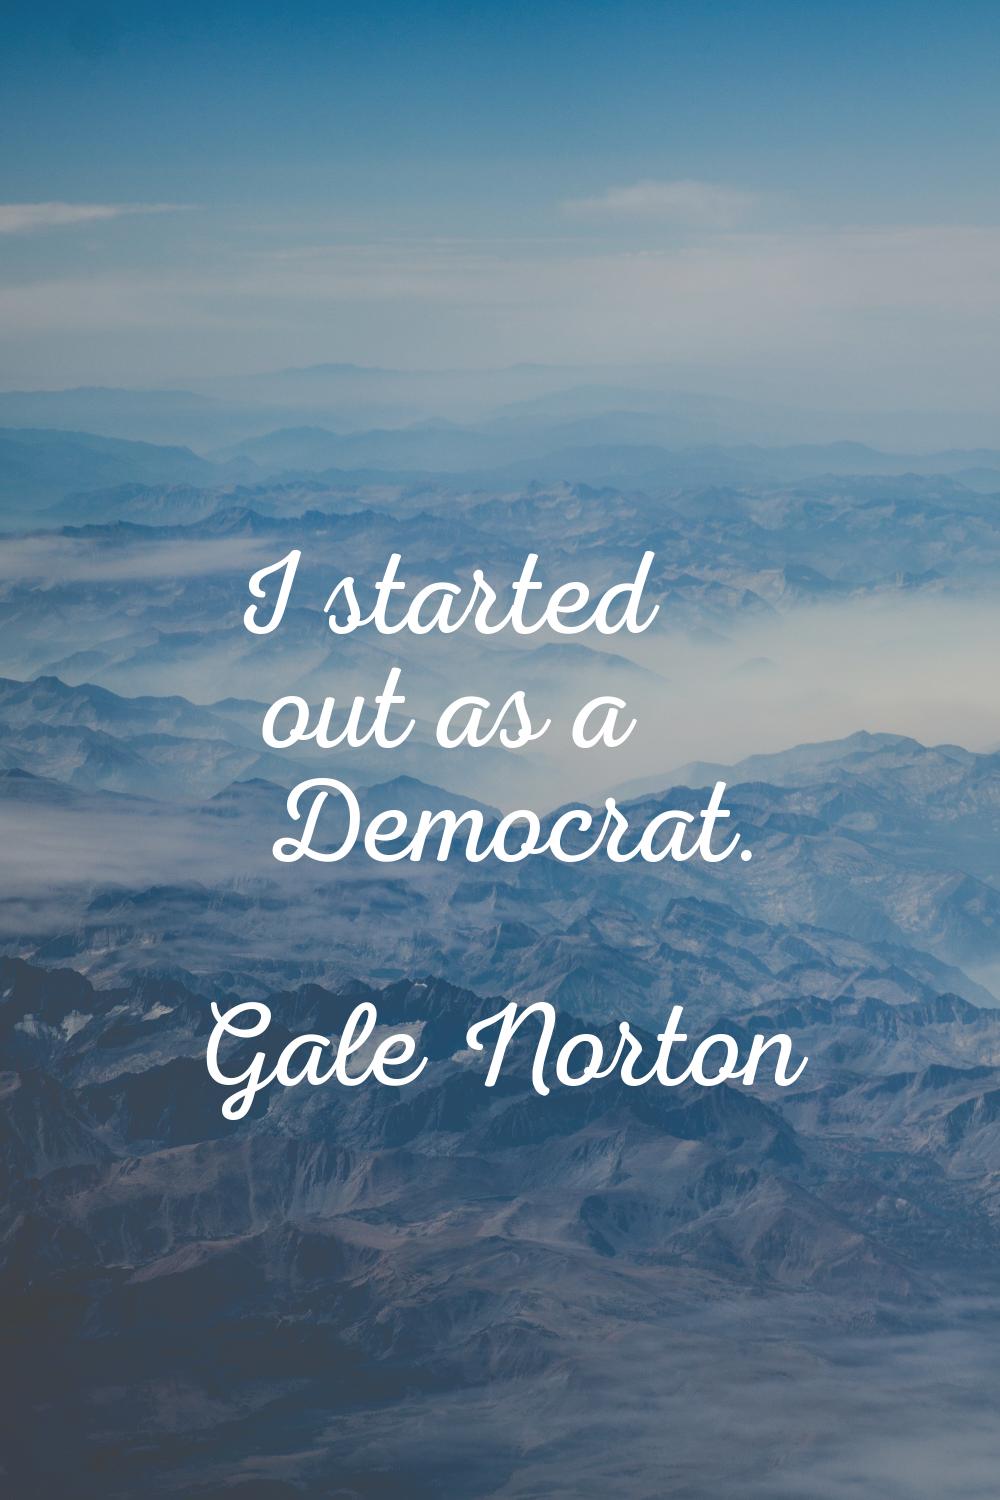 I started out as a Democrat.